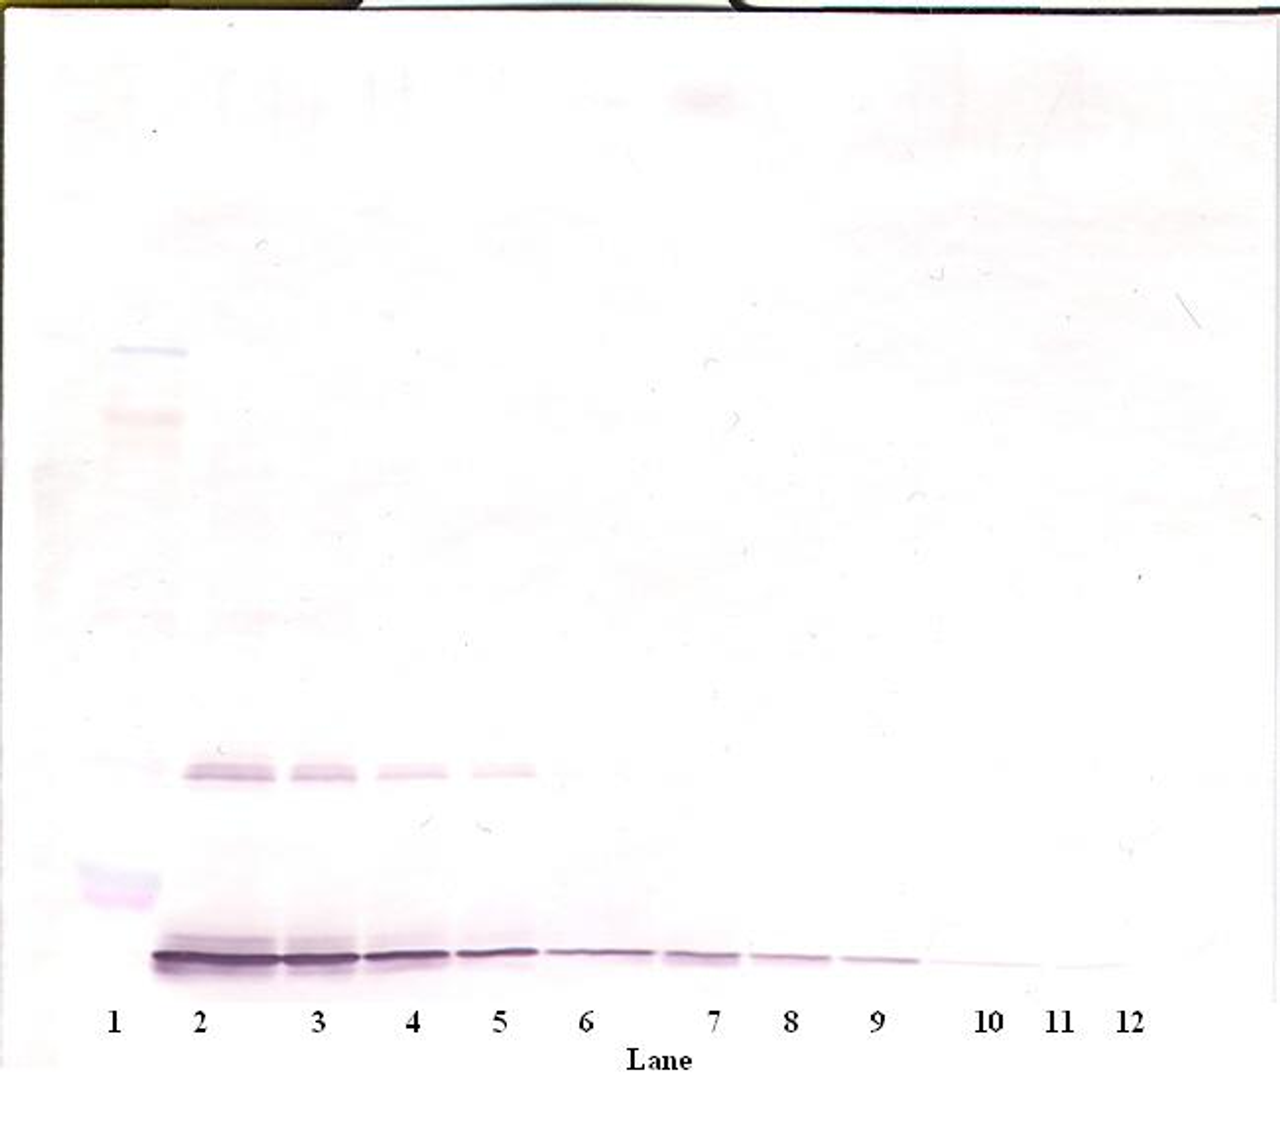 To detect Rat IL-10 by Western Blot analysis this antibody can be used at a concentration of 0.1-0.2 ug/ml. Used in conjunction with compatible secondary reagents the detection limit for recombinant Rat IL-10 is 1.5-3.0 ng/lane, under either reducing or non-reducing conditions.